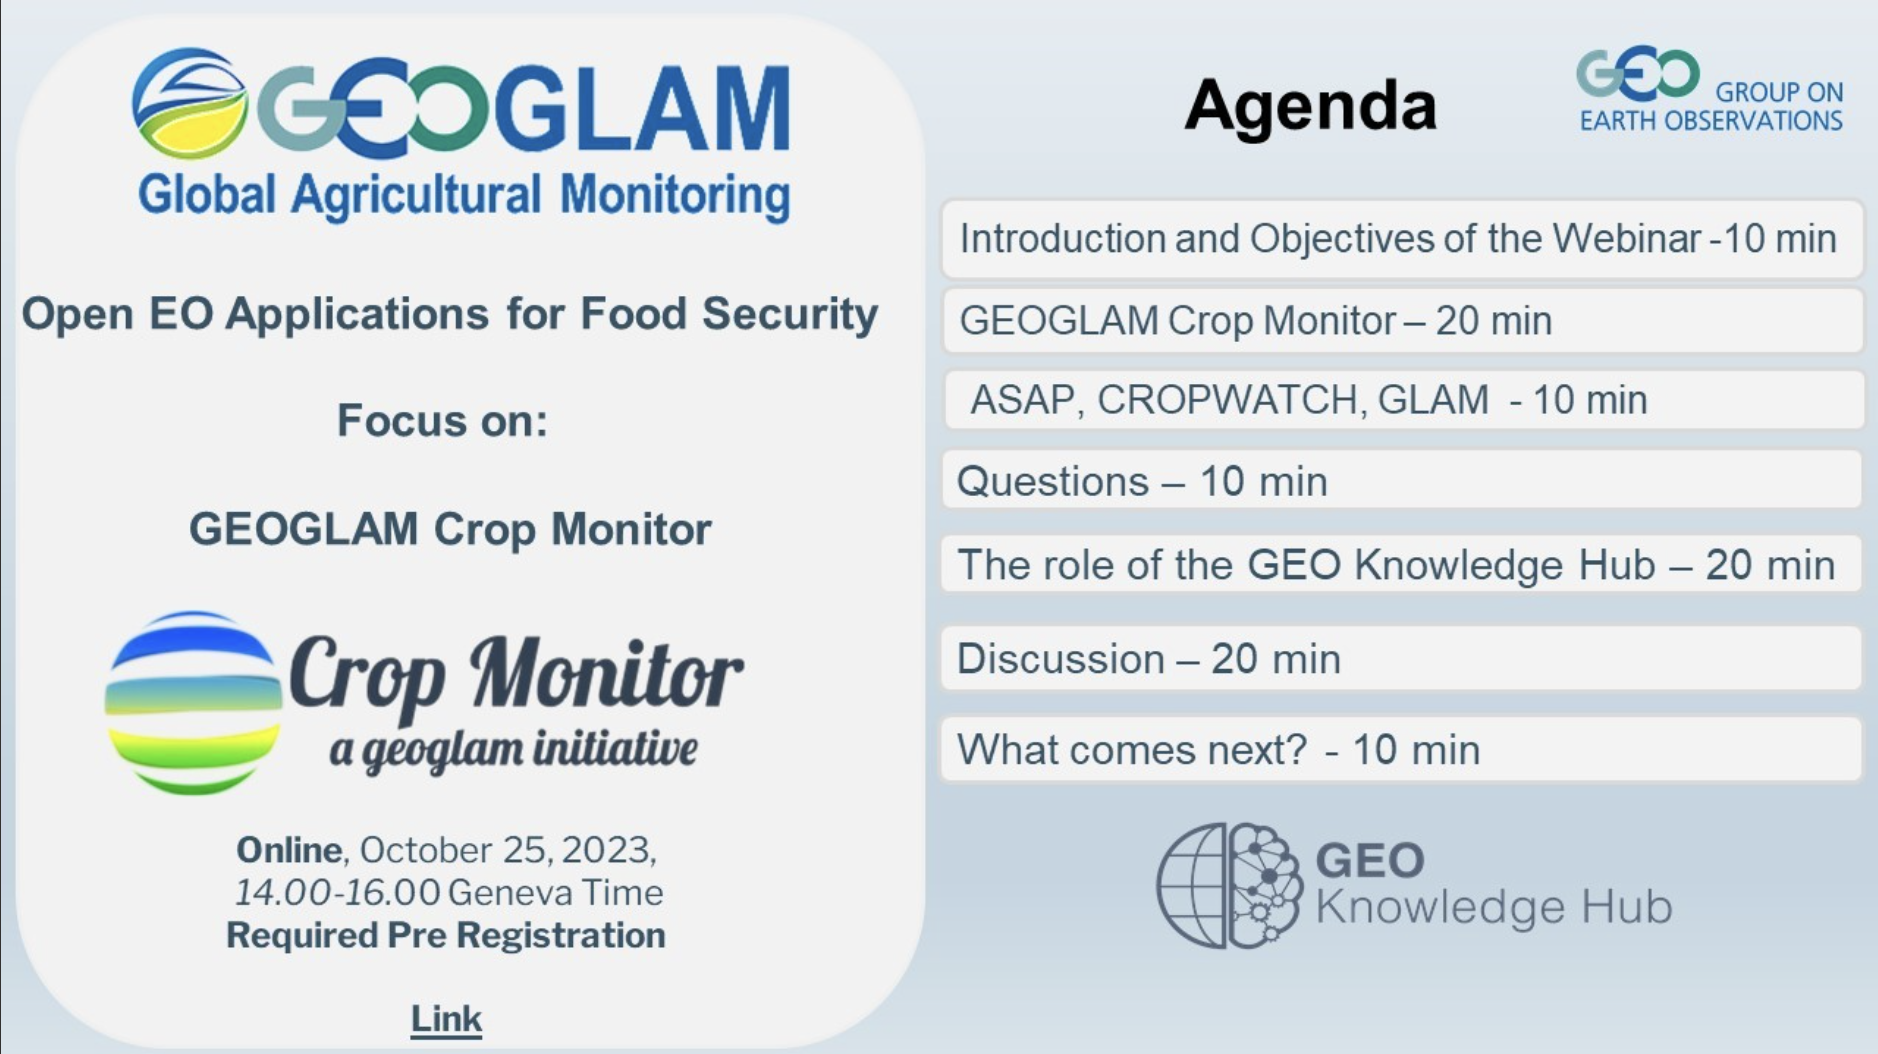  Global Agricultural Monitoring, Open EO Applications for Food Security: Focus on GEOGLAM Crop Monitor, a geoglam initiative